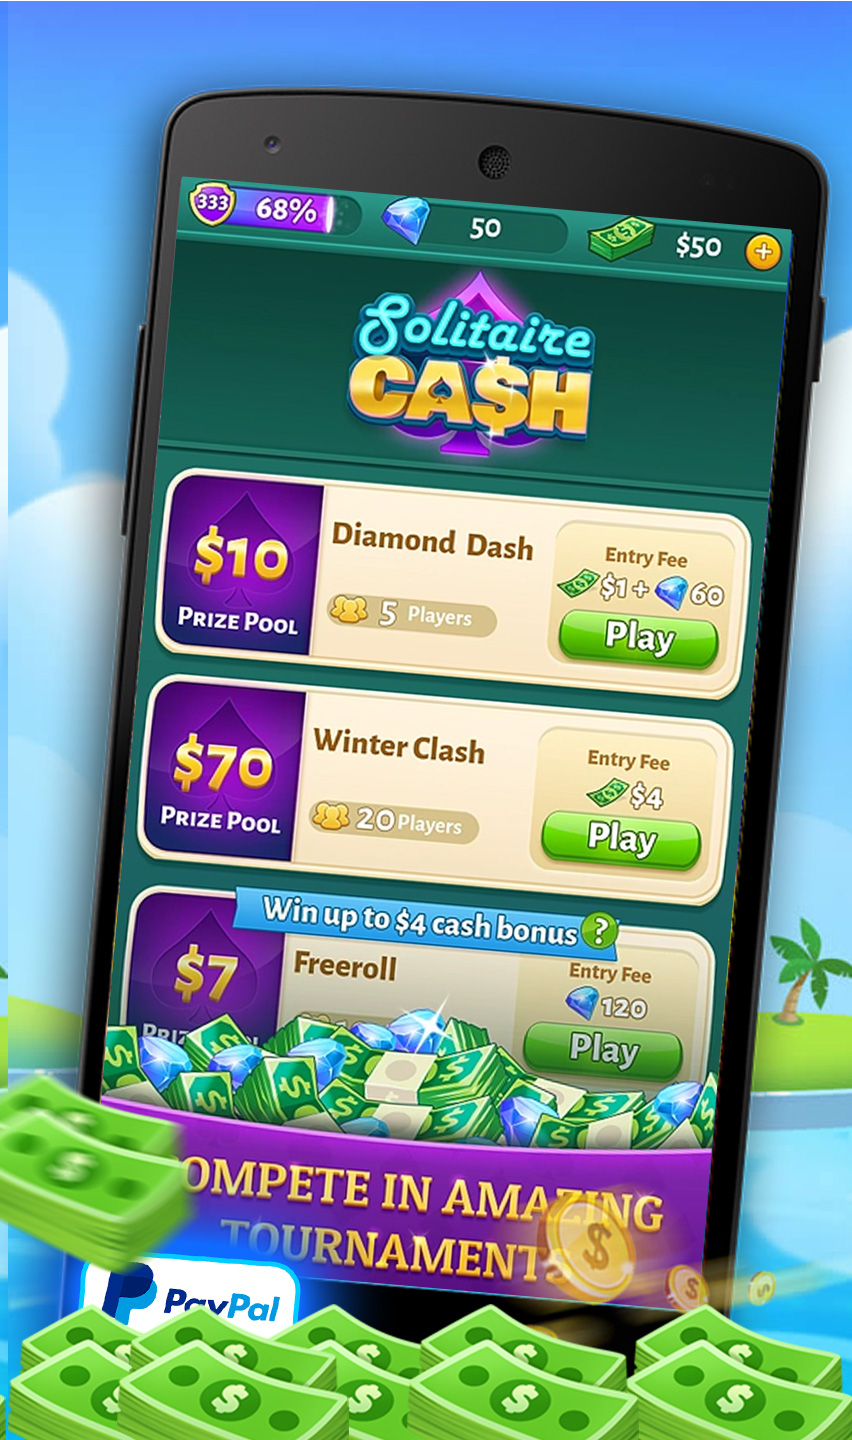 Solitaire Cash: Win Real Money Playing A Skills Based Game